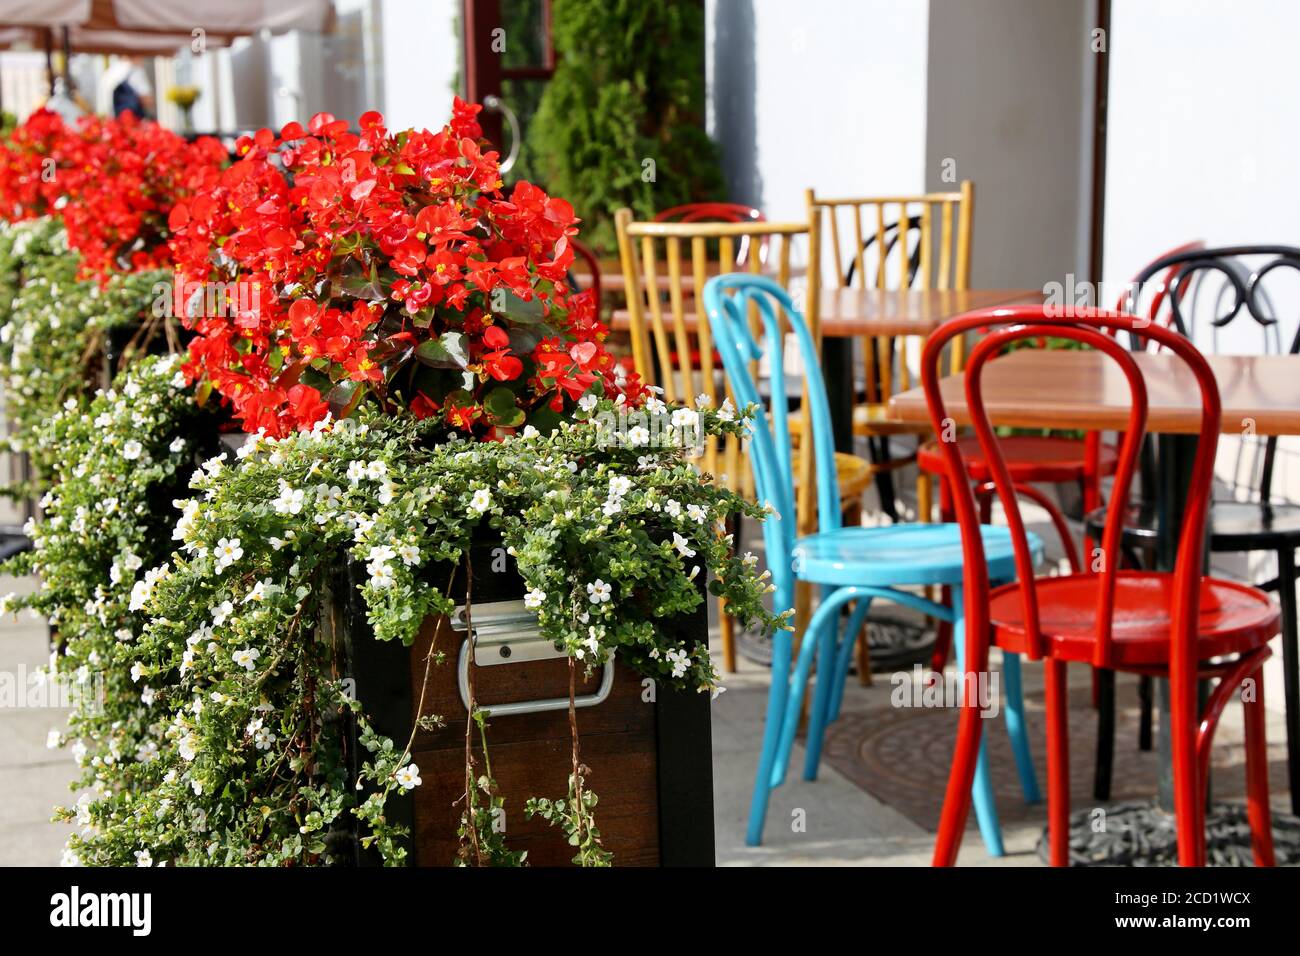 Street cafe in a city, tables and vintage metal chairs in a restaurant outdoor. Pots with flowers, elegant setting for celebration and date Stock Photo